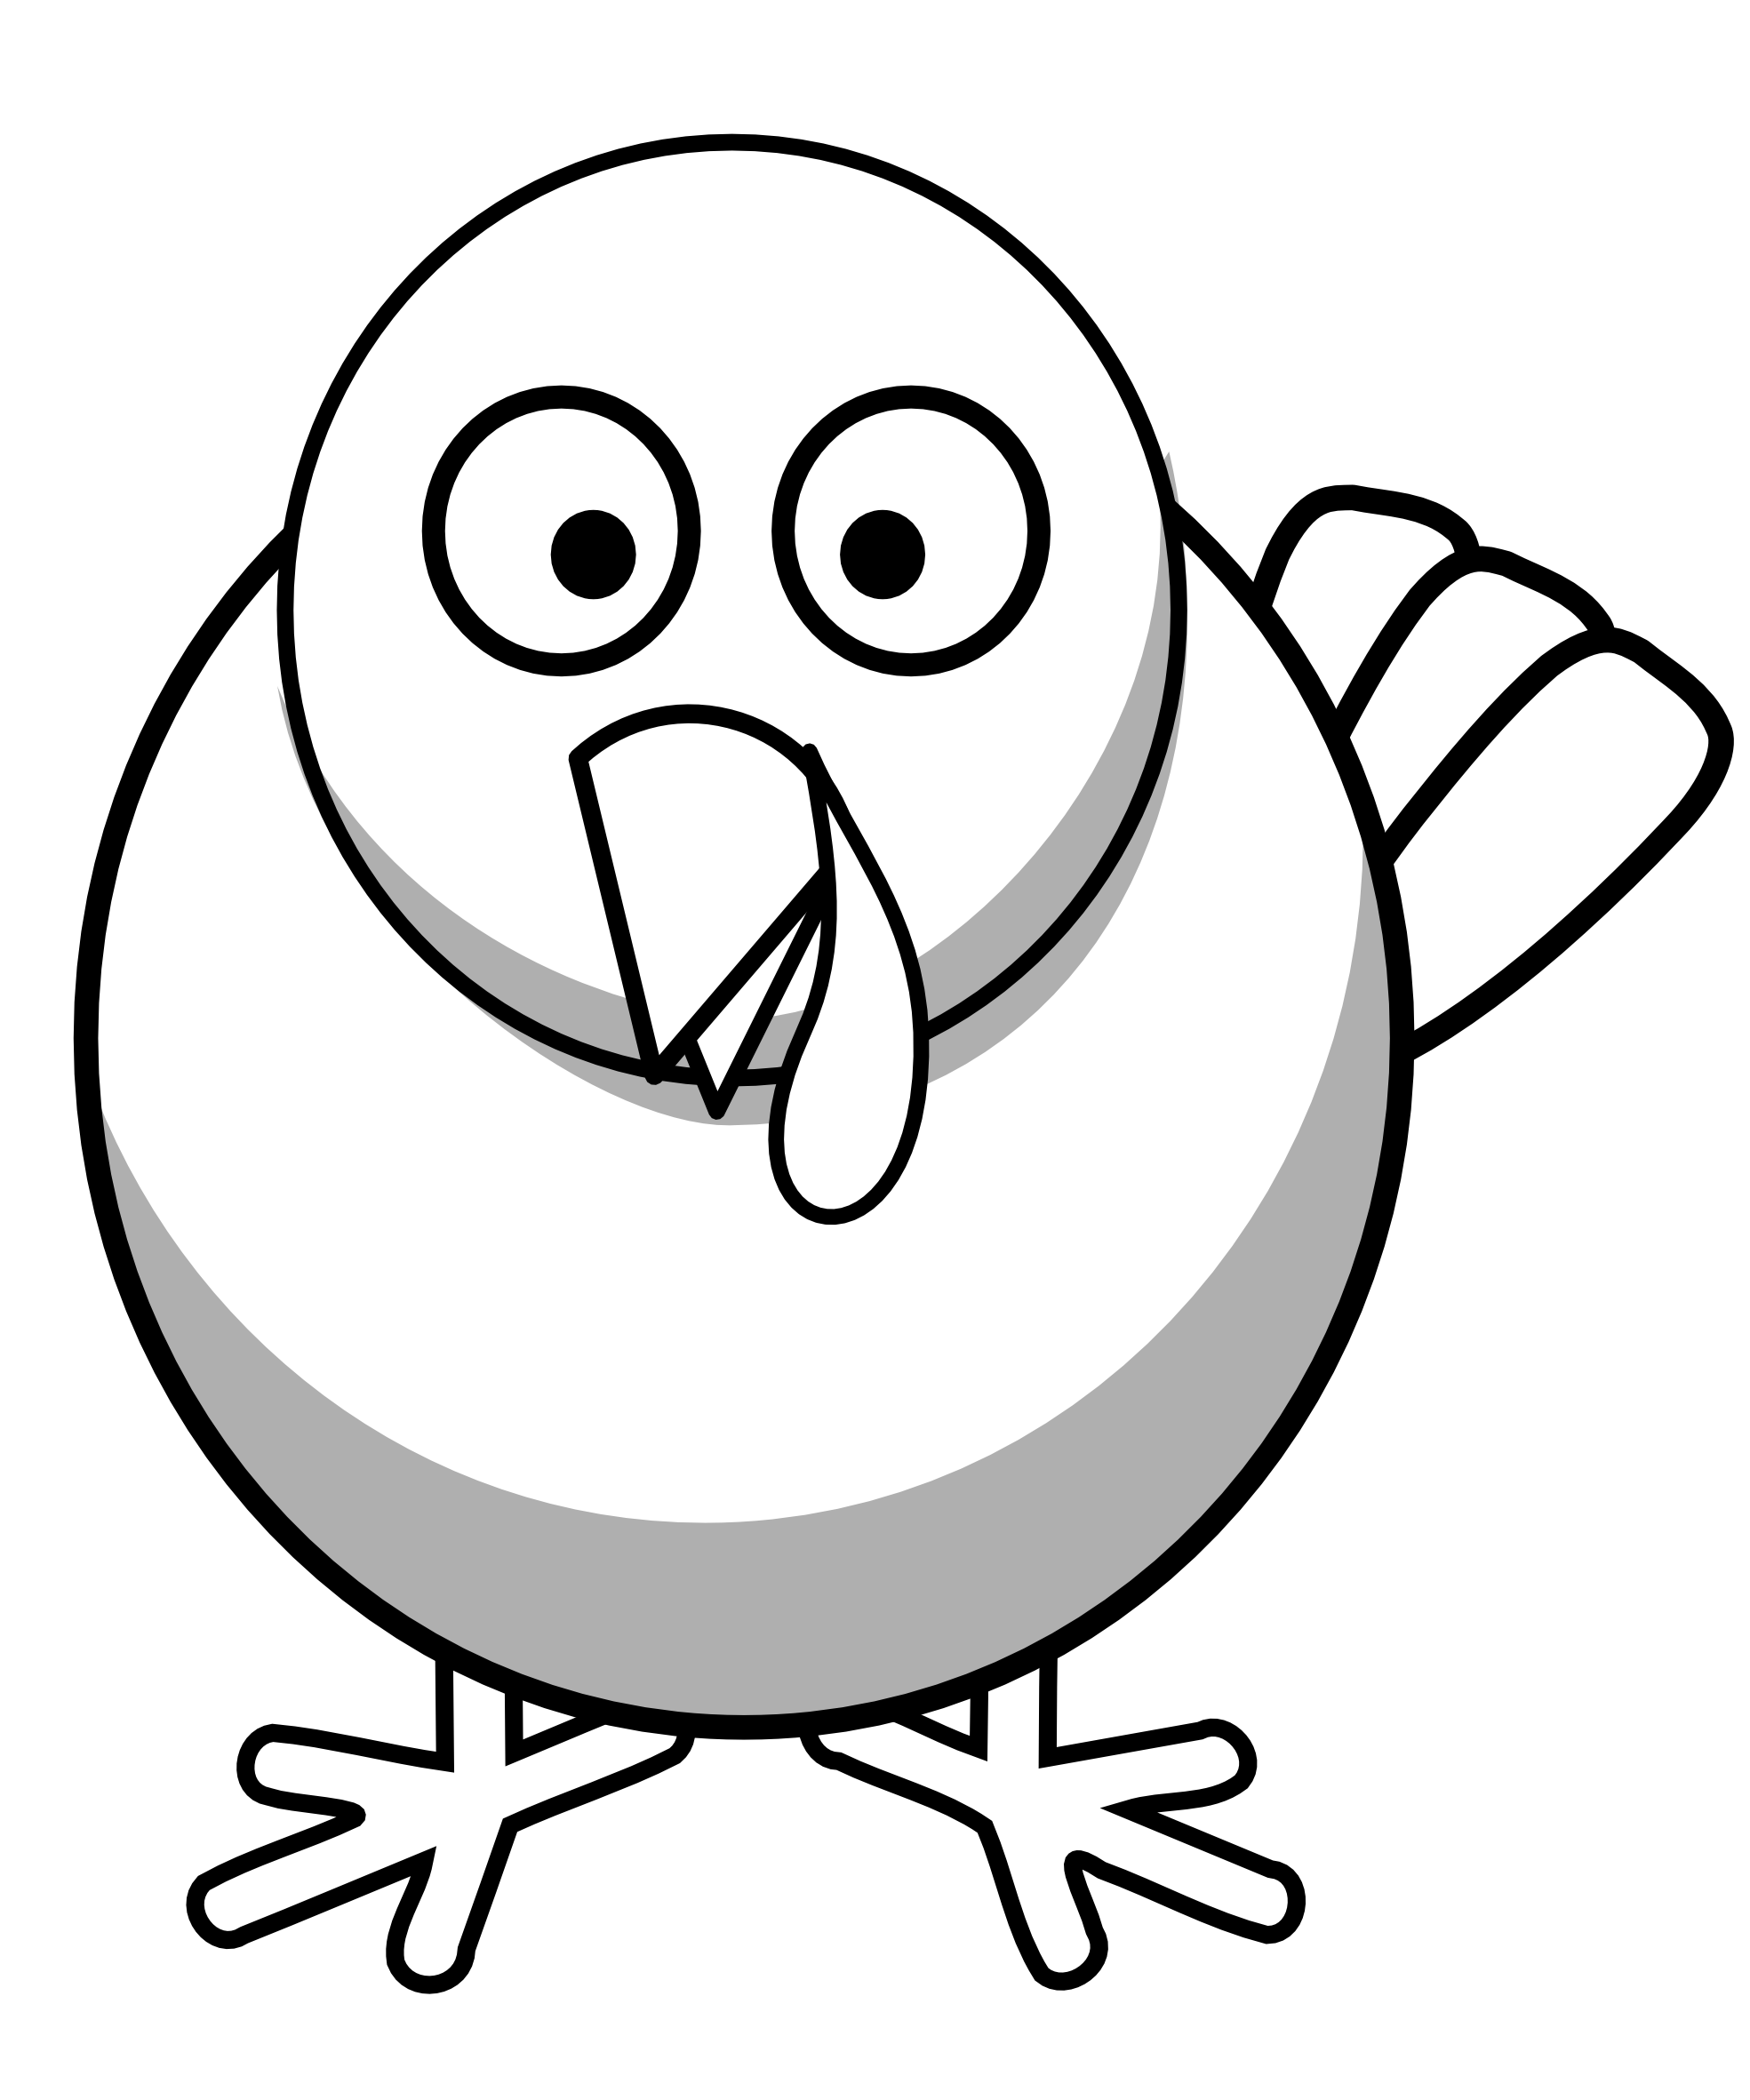 free-black-and-white-turkey-clipart-download-free-black-and-white